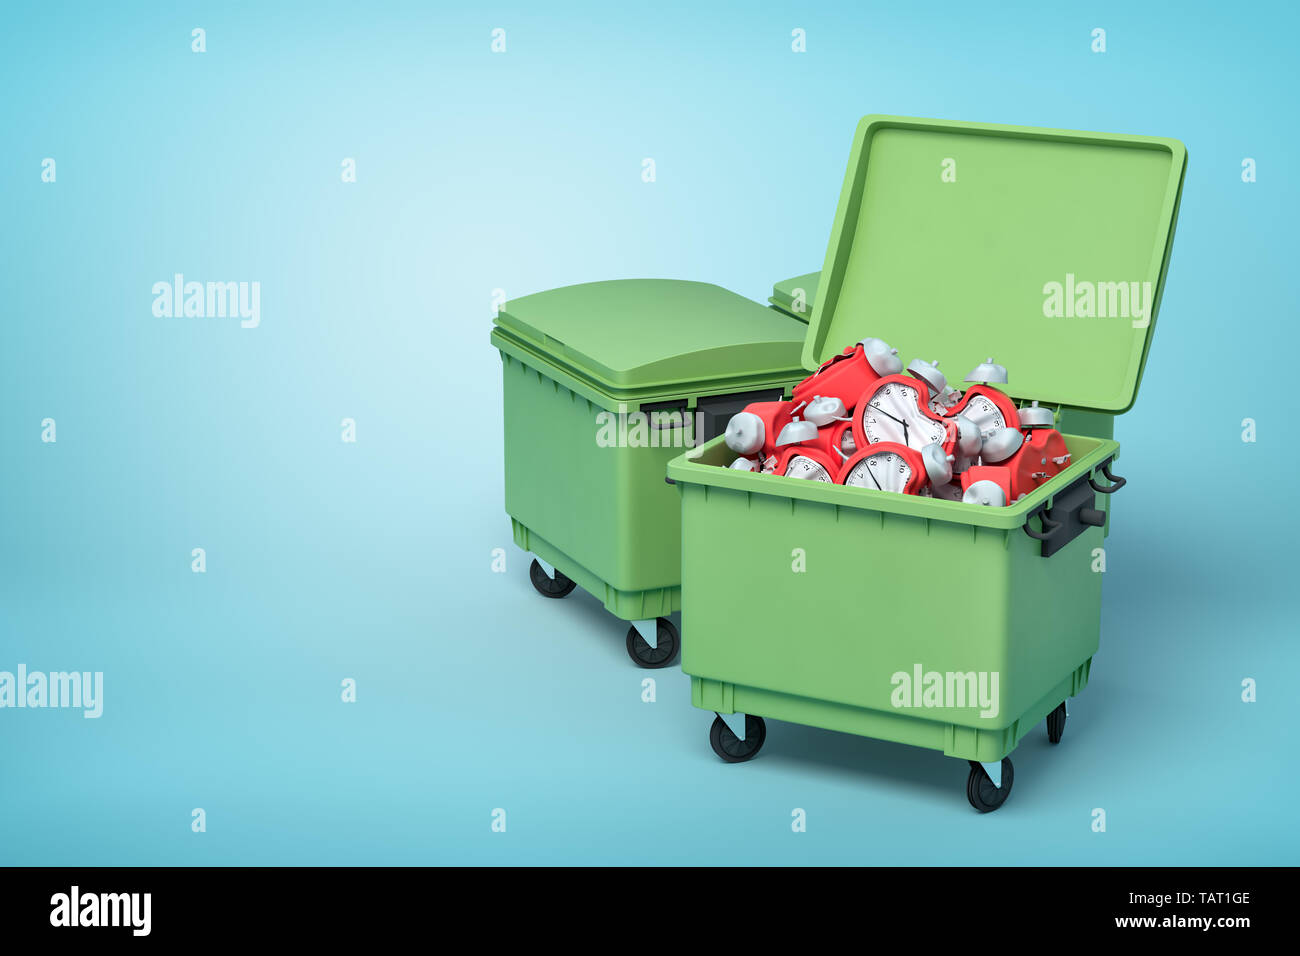 3d rendering of two green trash cans, front can open and full of broken and bent red alarm clocks, on light-blue background. Stock Photo